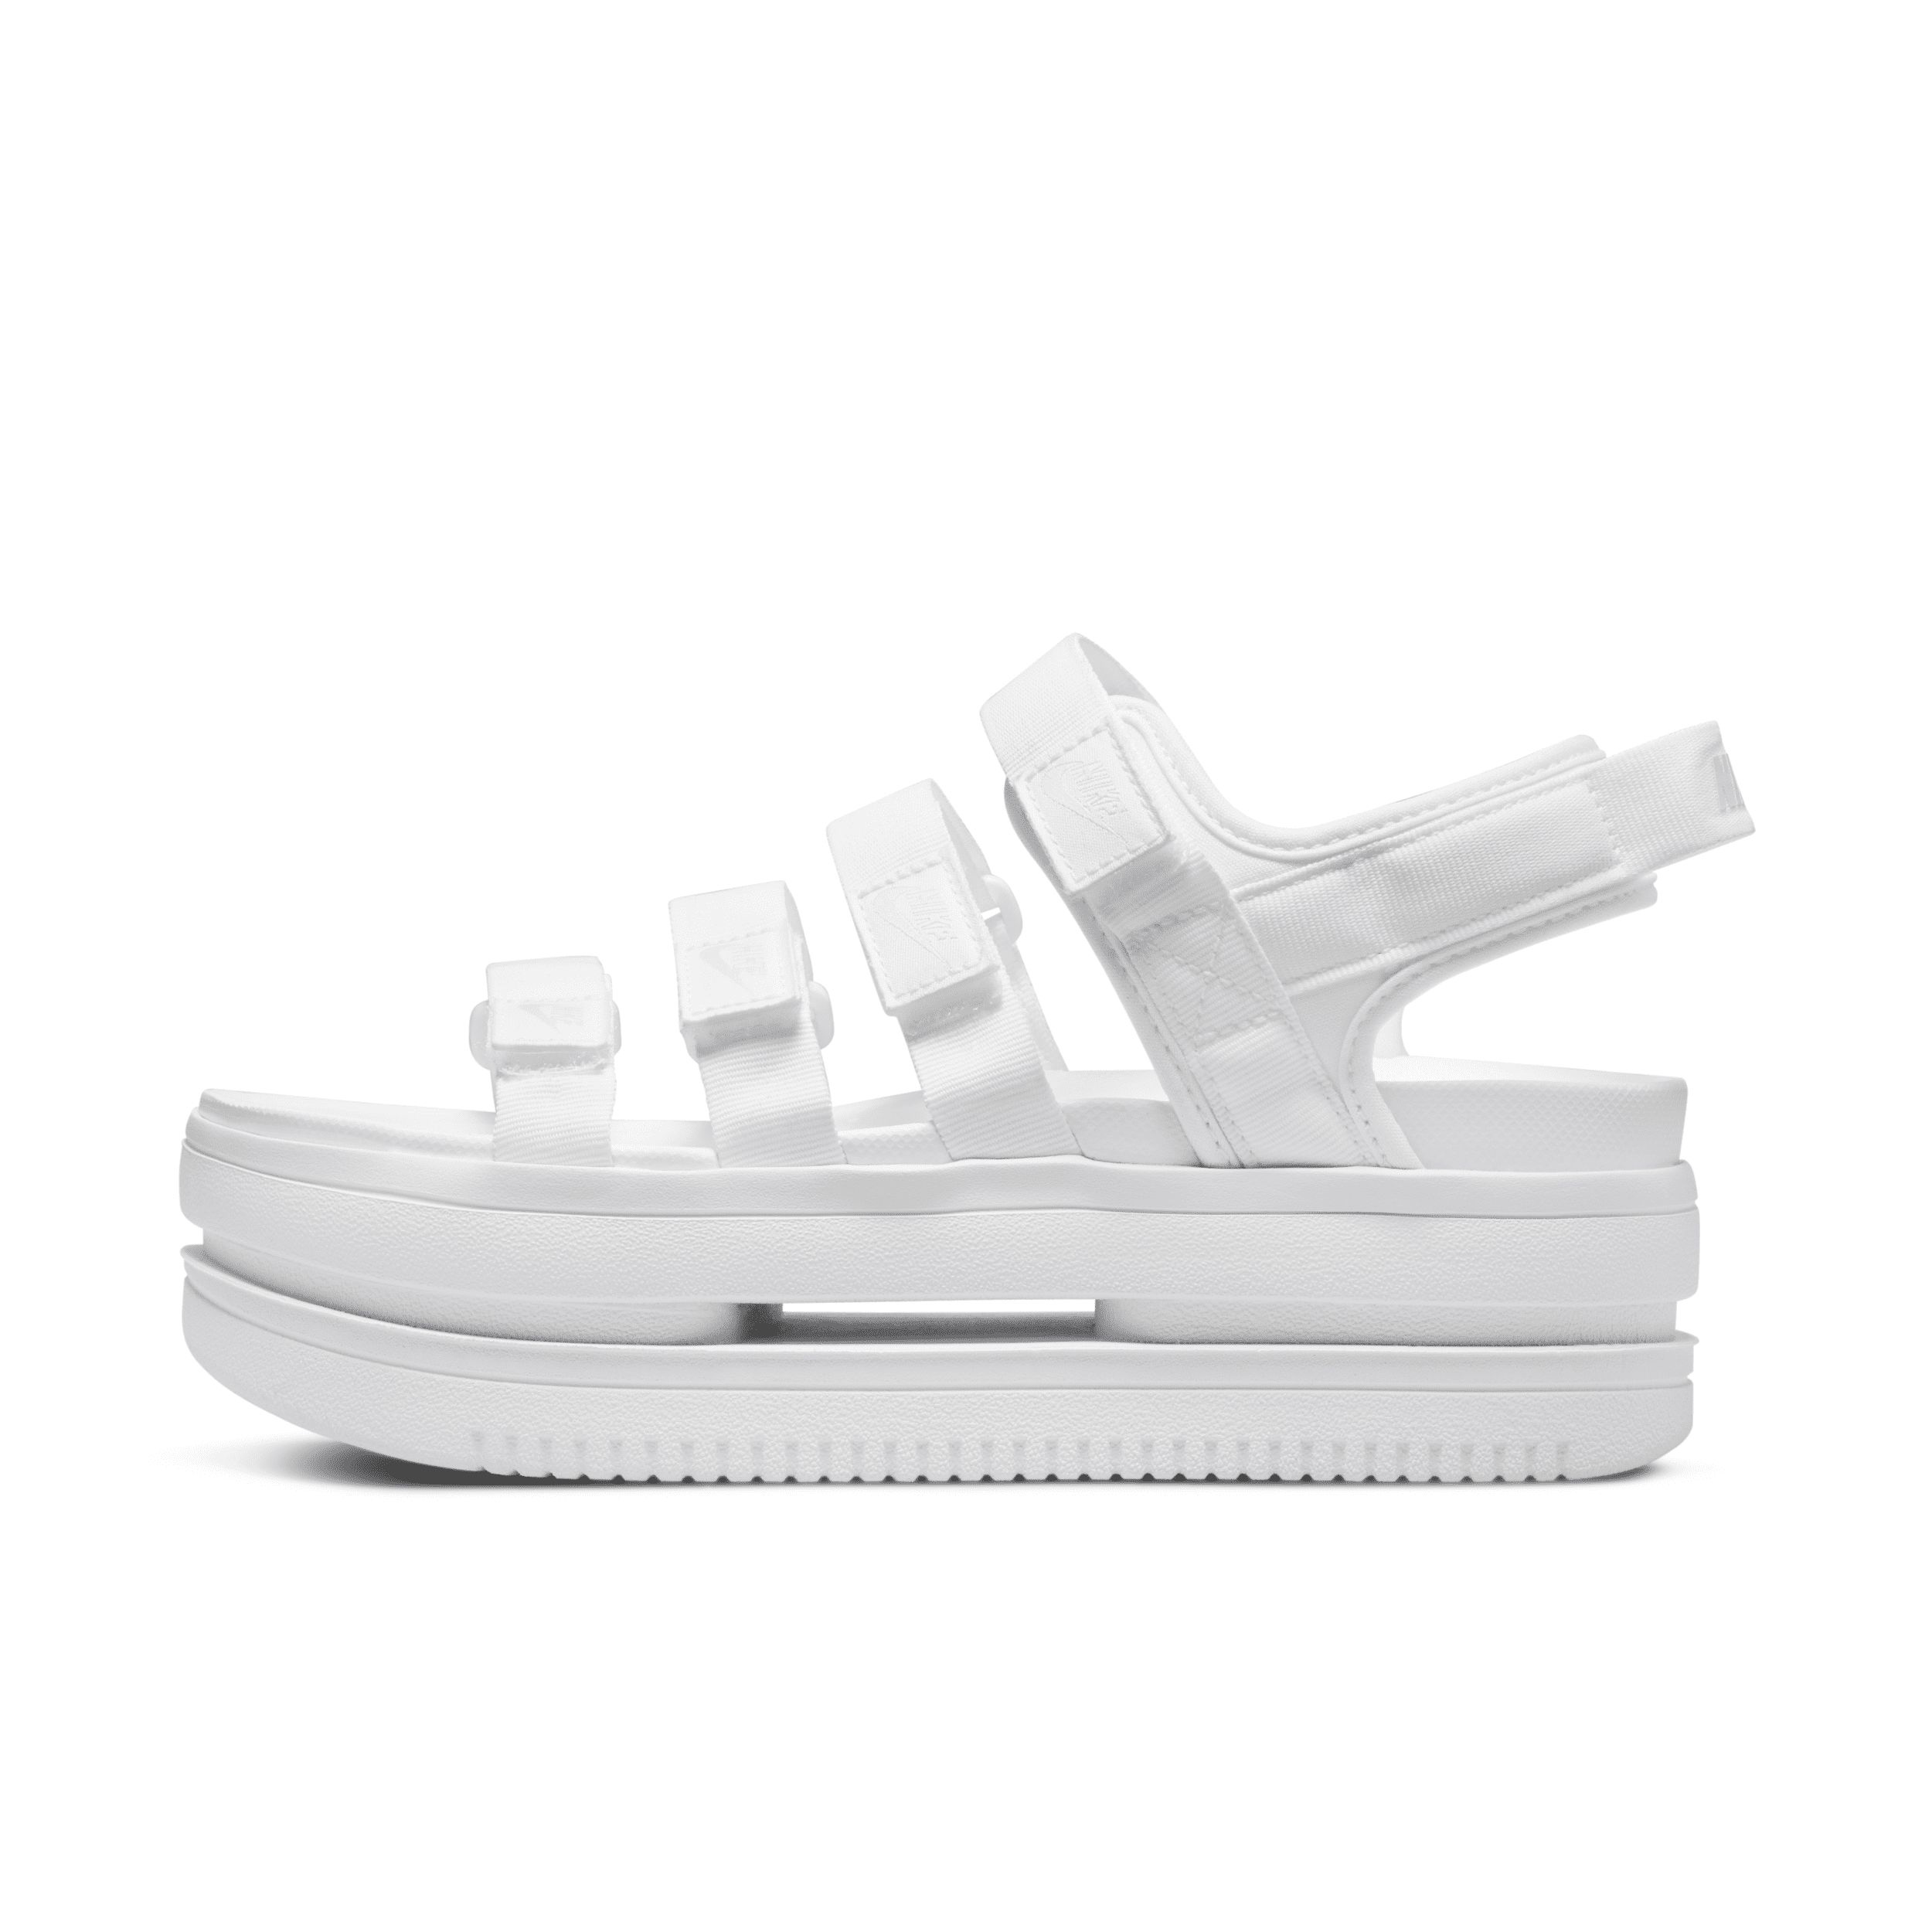 Nike Women's Icon Classic Sandals in White, Size: 10 | DH0224-100 | Nike (US)